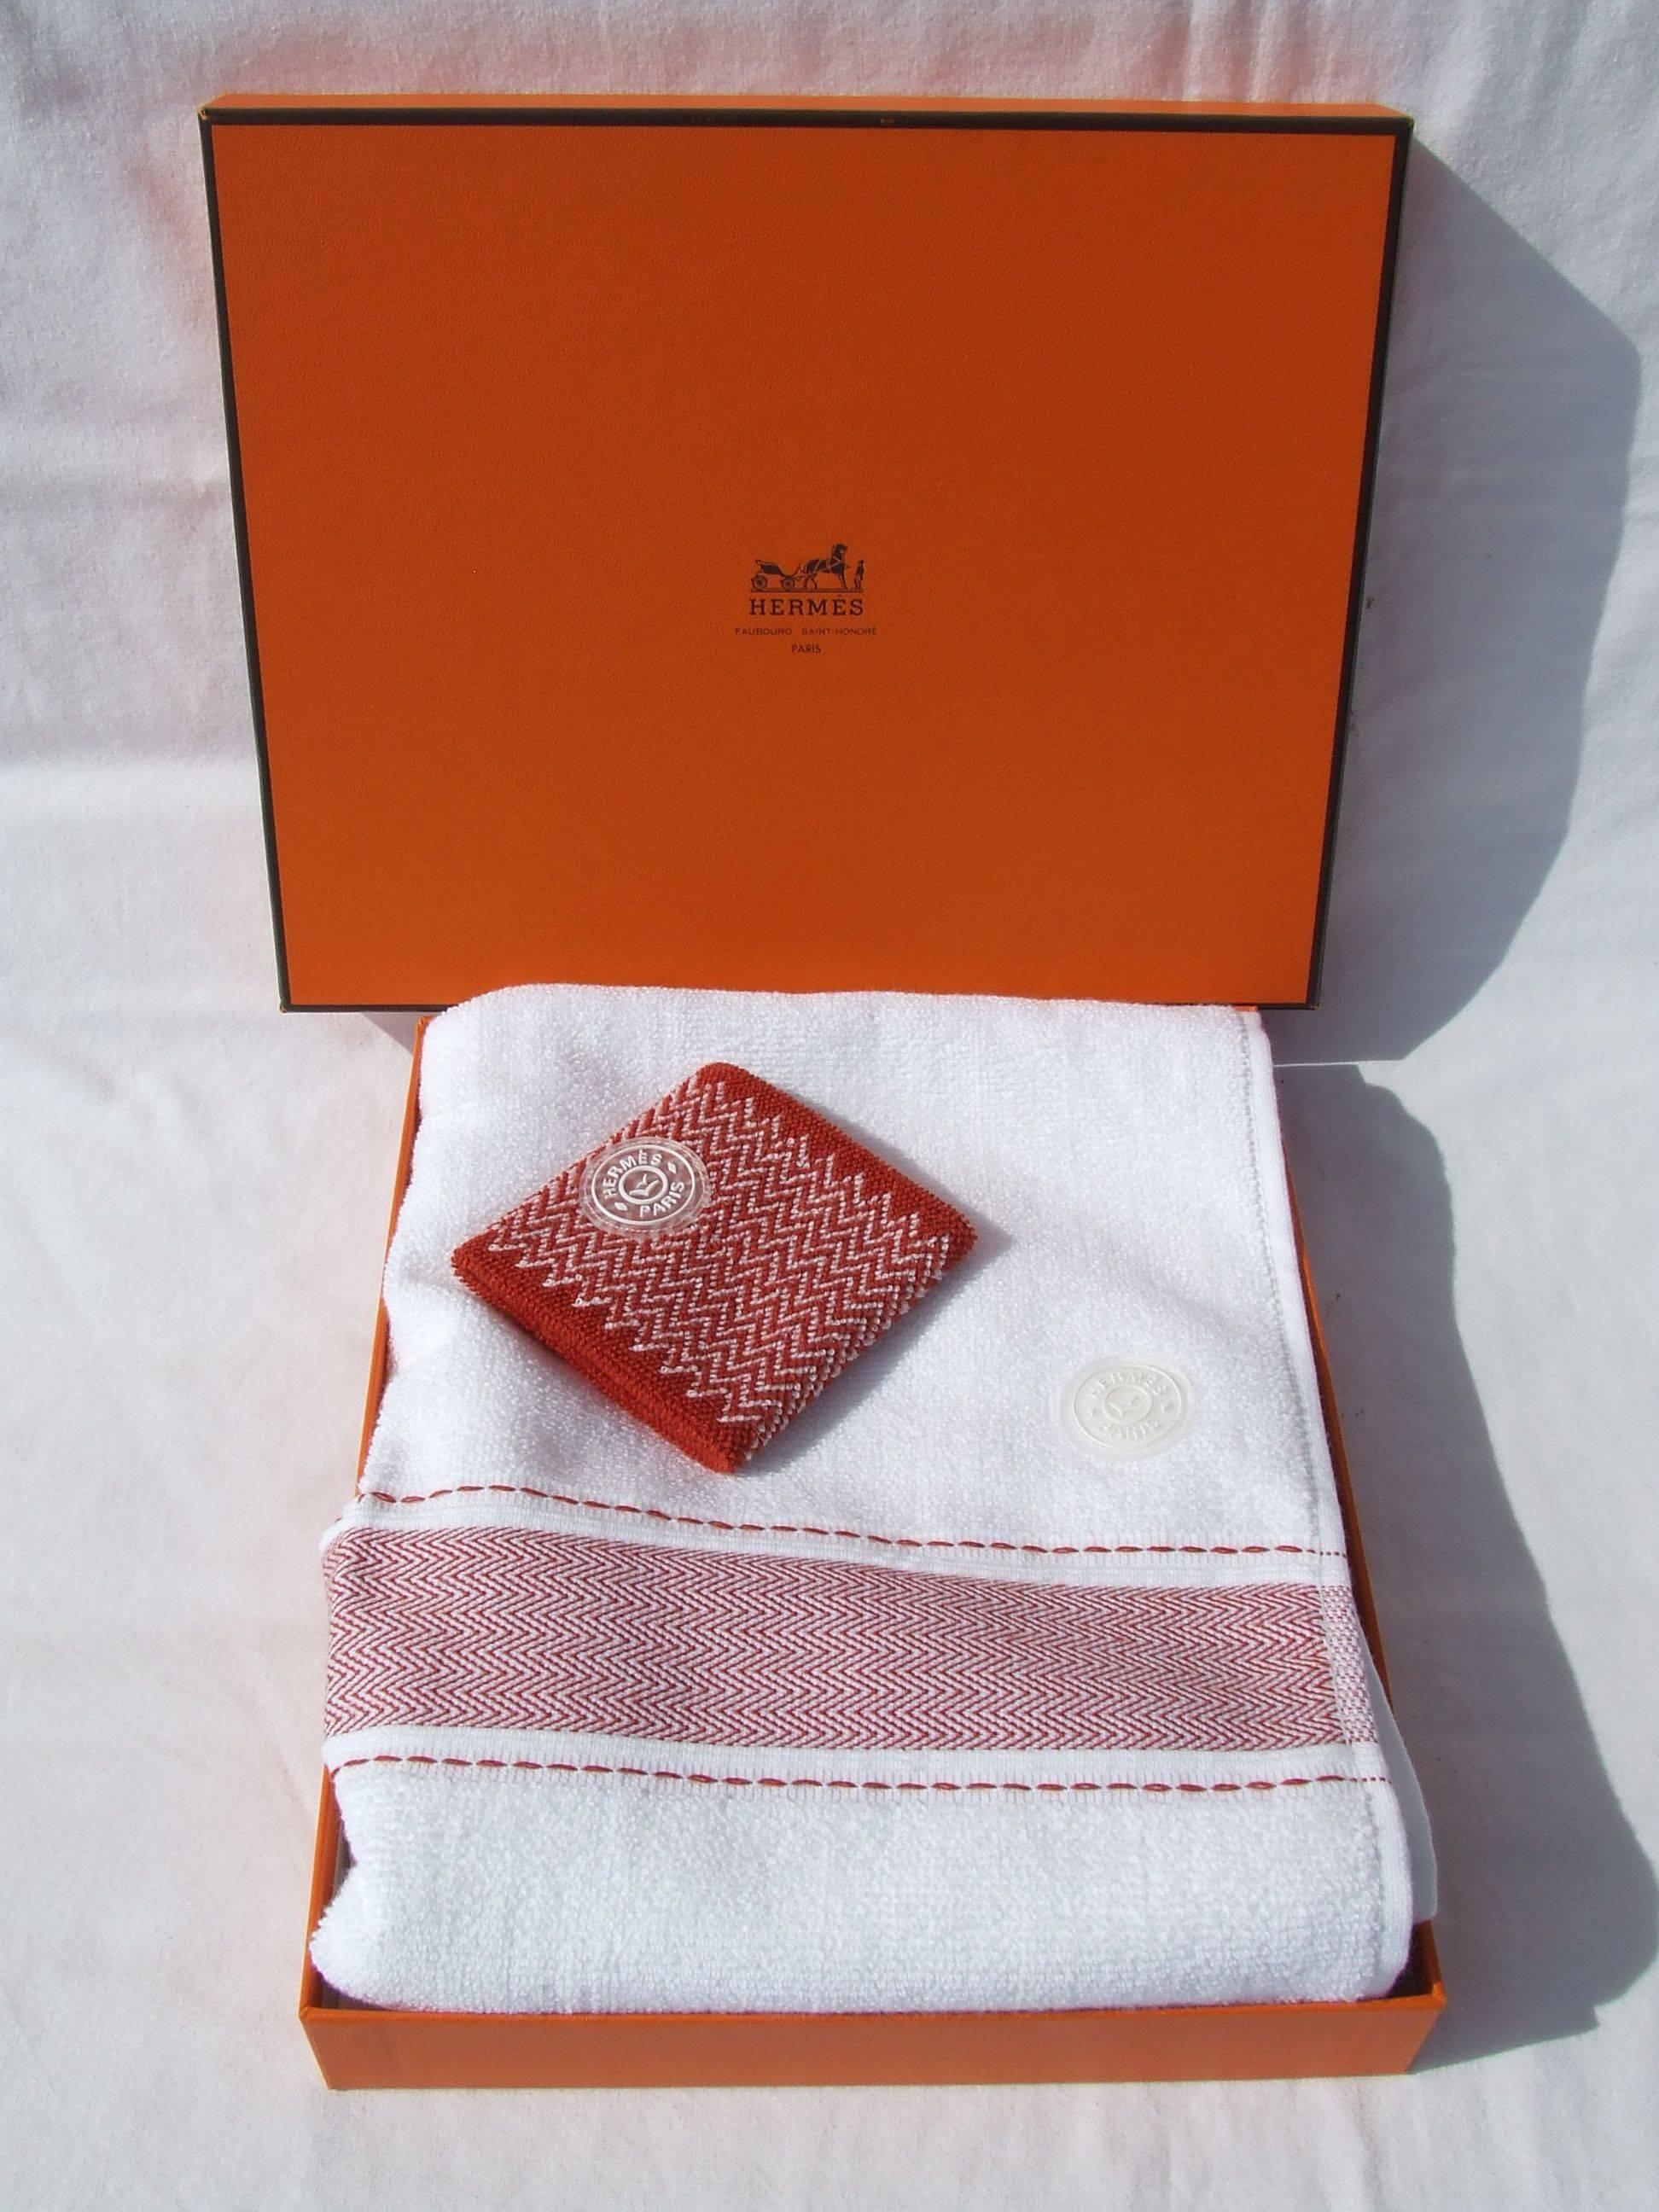 Hermès Set of Sports Towel and Sweatband Tennis Combed Cotton For Woman NIB 6